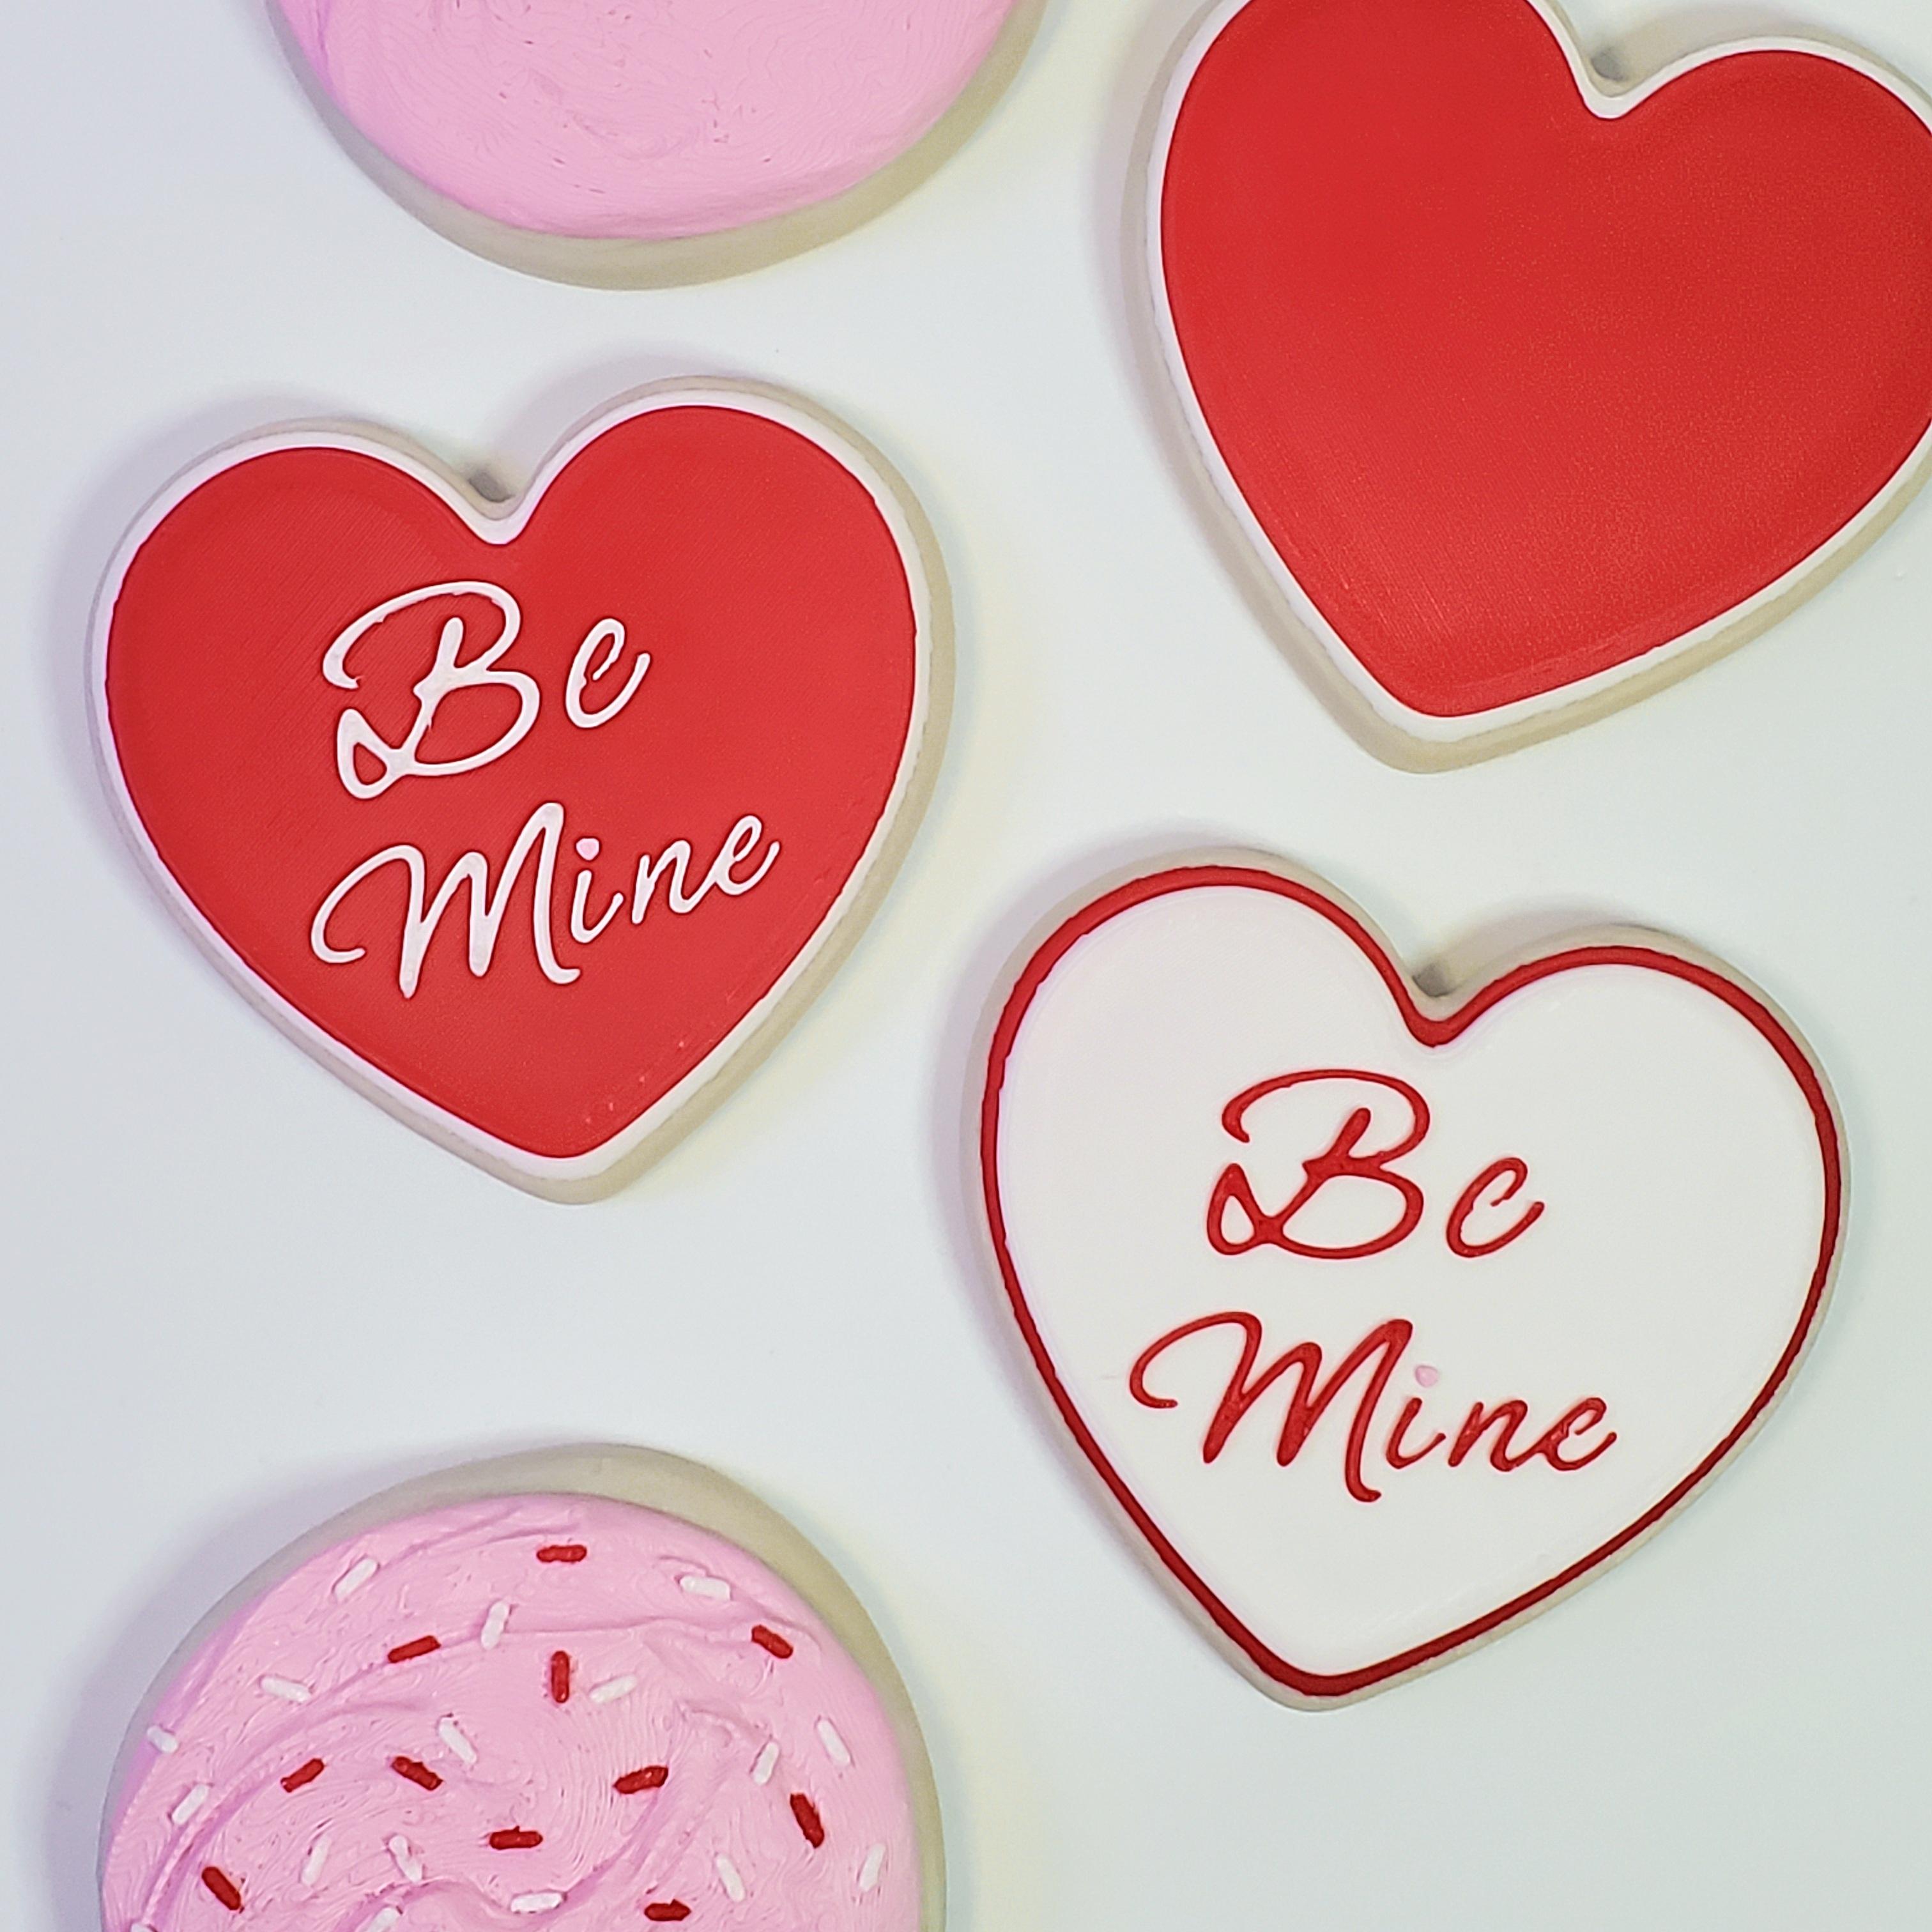 REMIXABLE Heart-shaped Shortbread Cookie with Royal Icing for Valentine's Day :: Delicious Desserts! 3d model